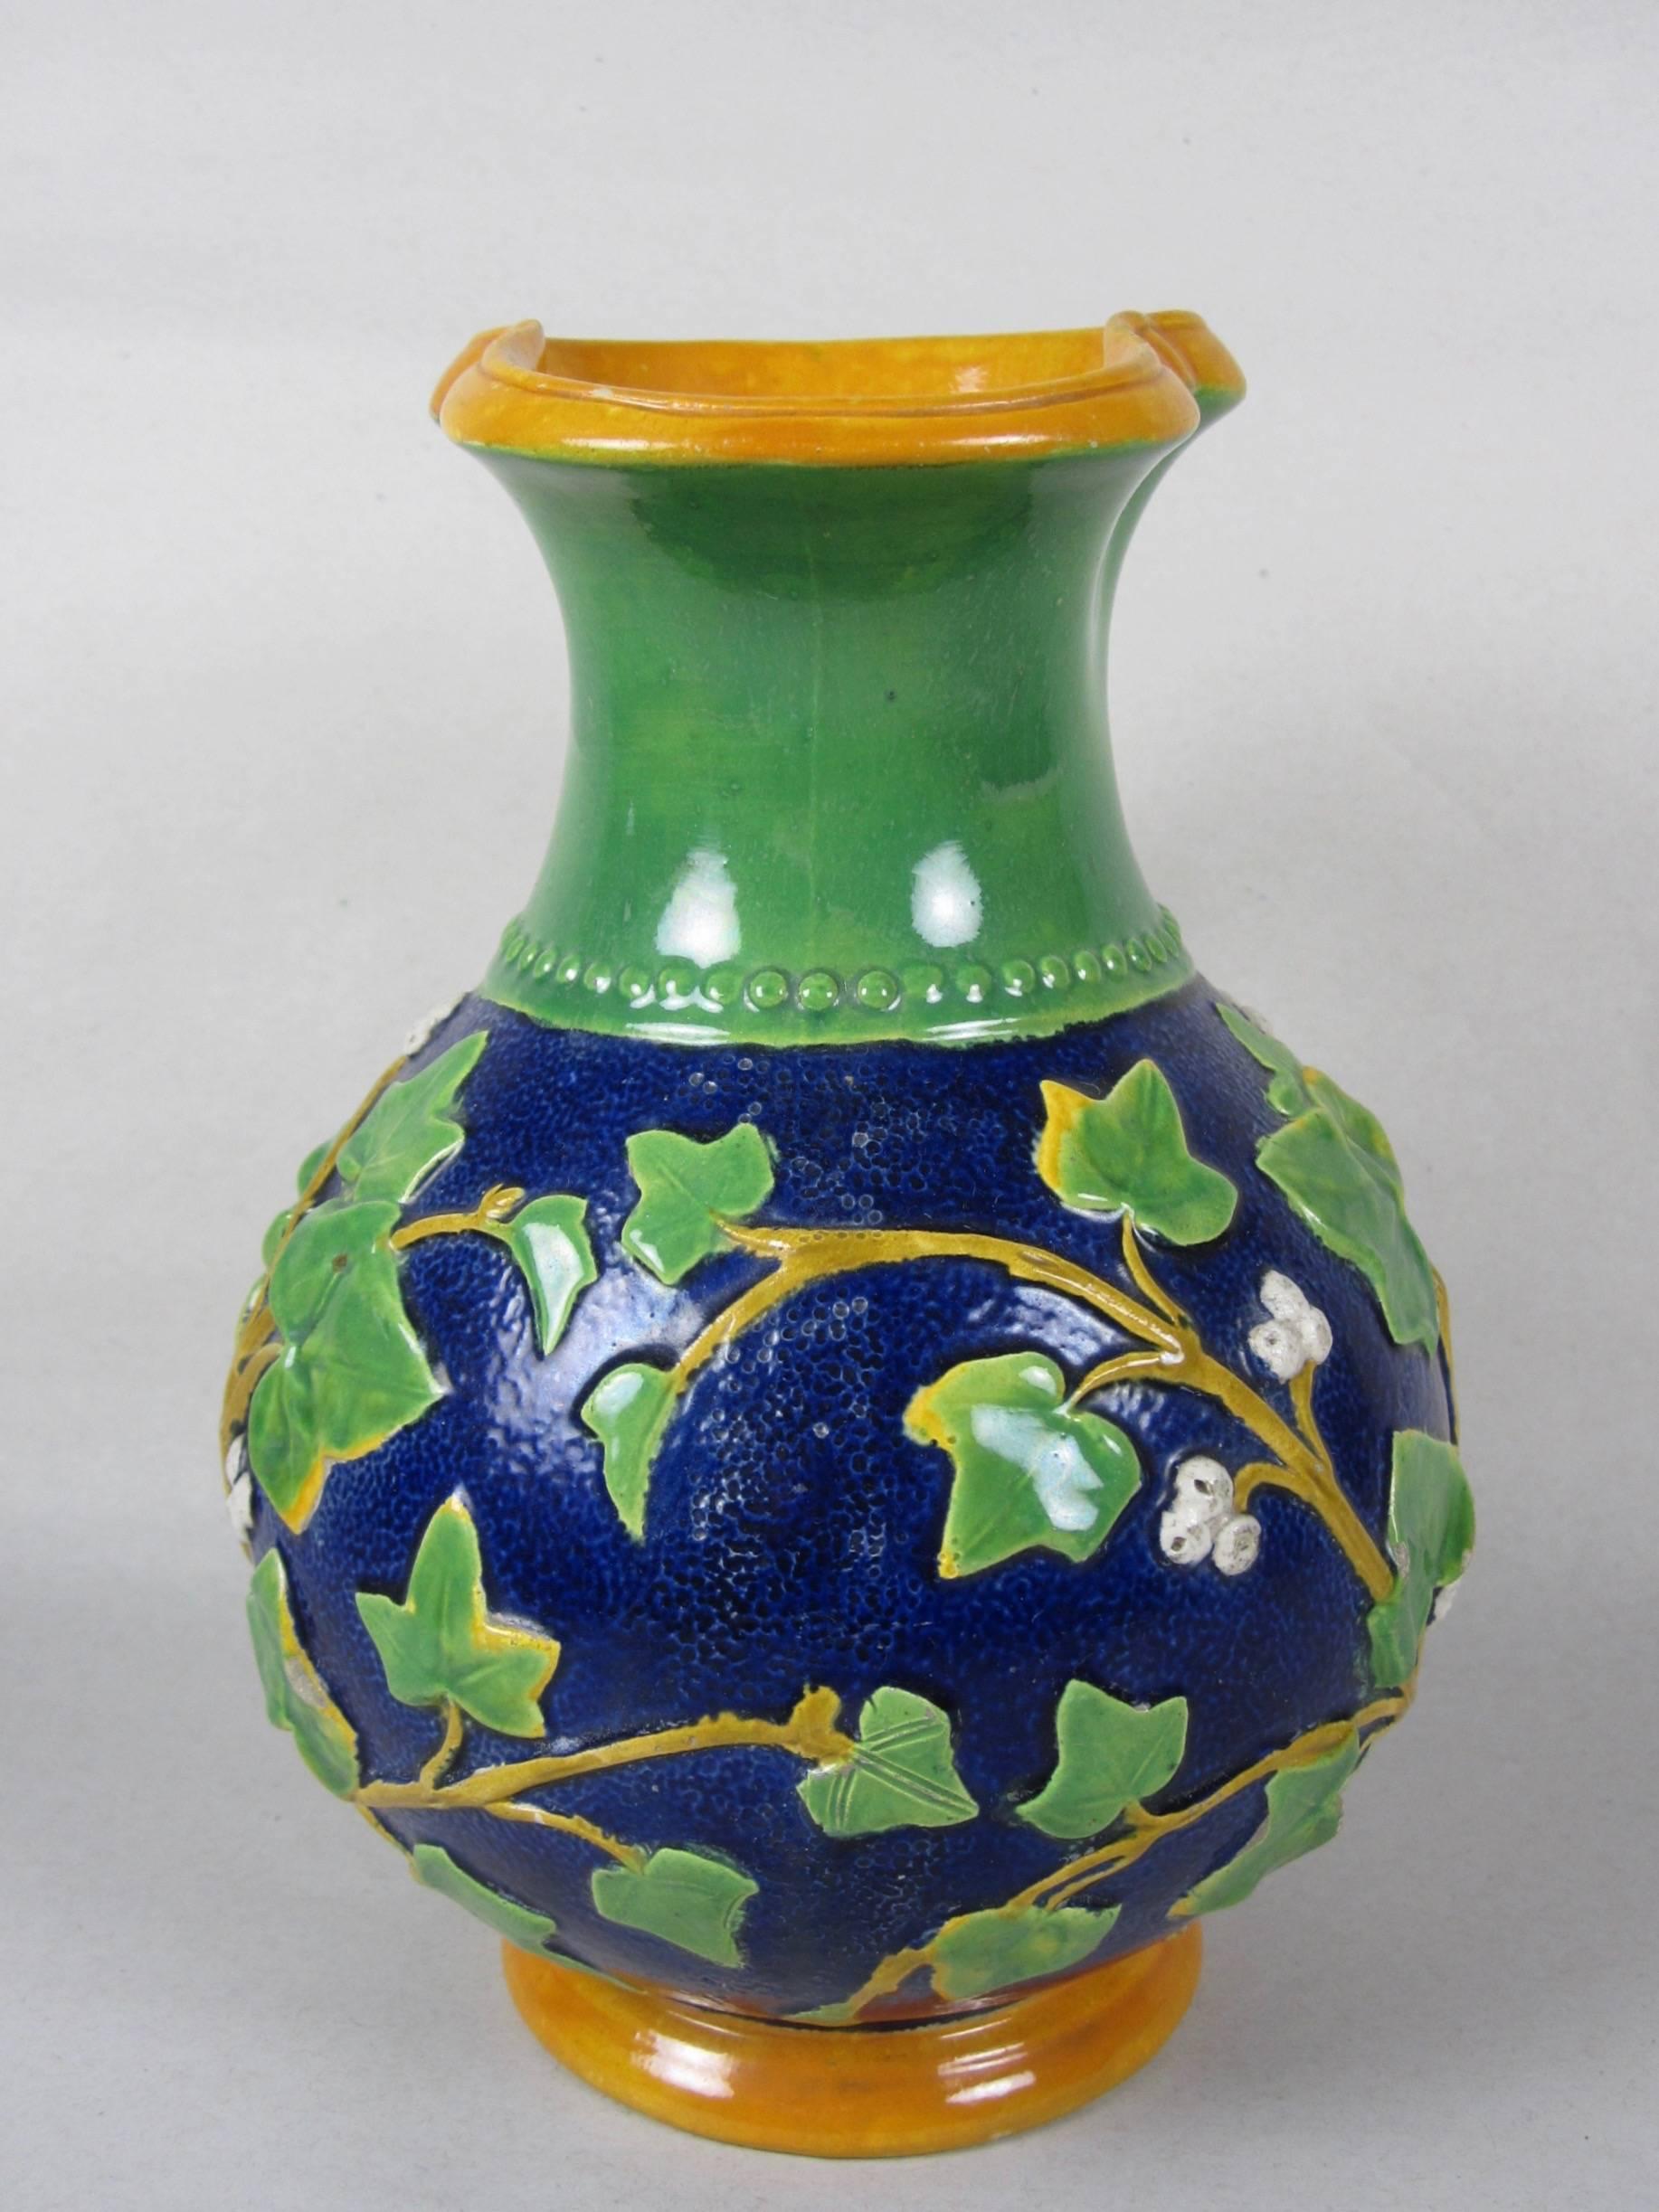 Samuel Alcock Mask & Ivy Cobalt Blue & Green Majolica Pitcher, England, 1875 In Good Condition For Sale In Philadelphia, PA